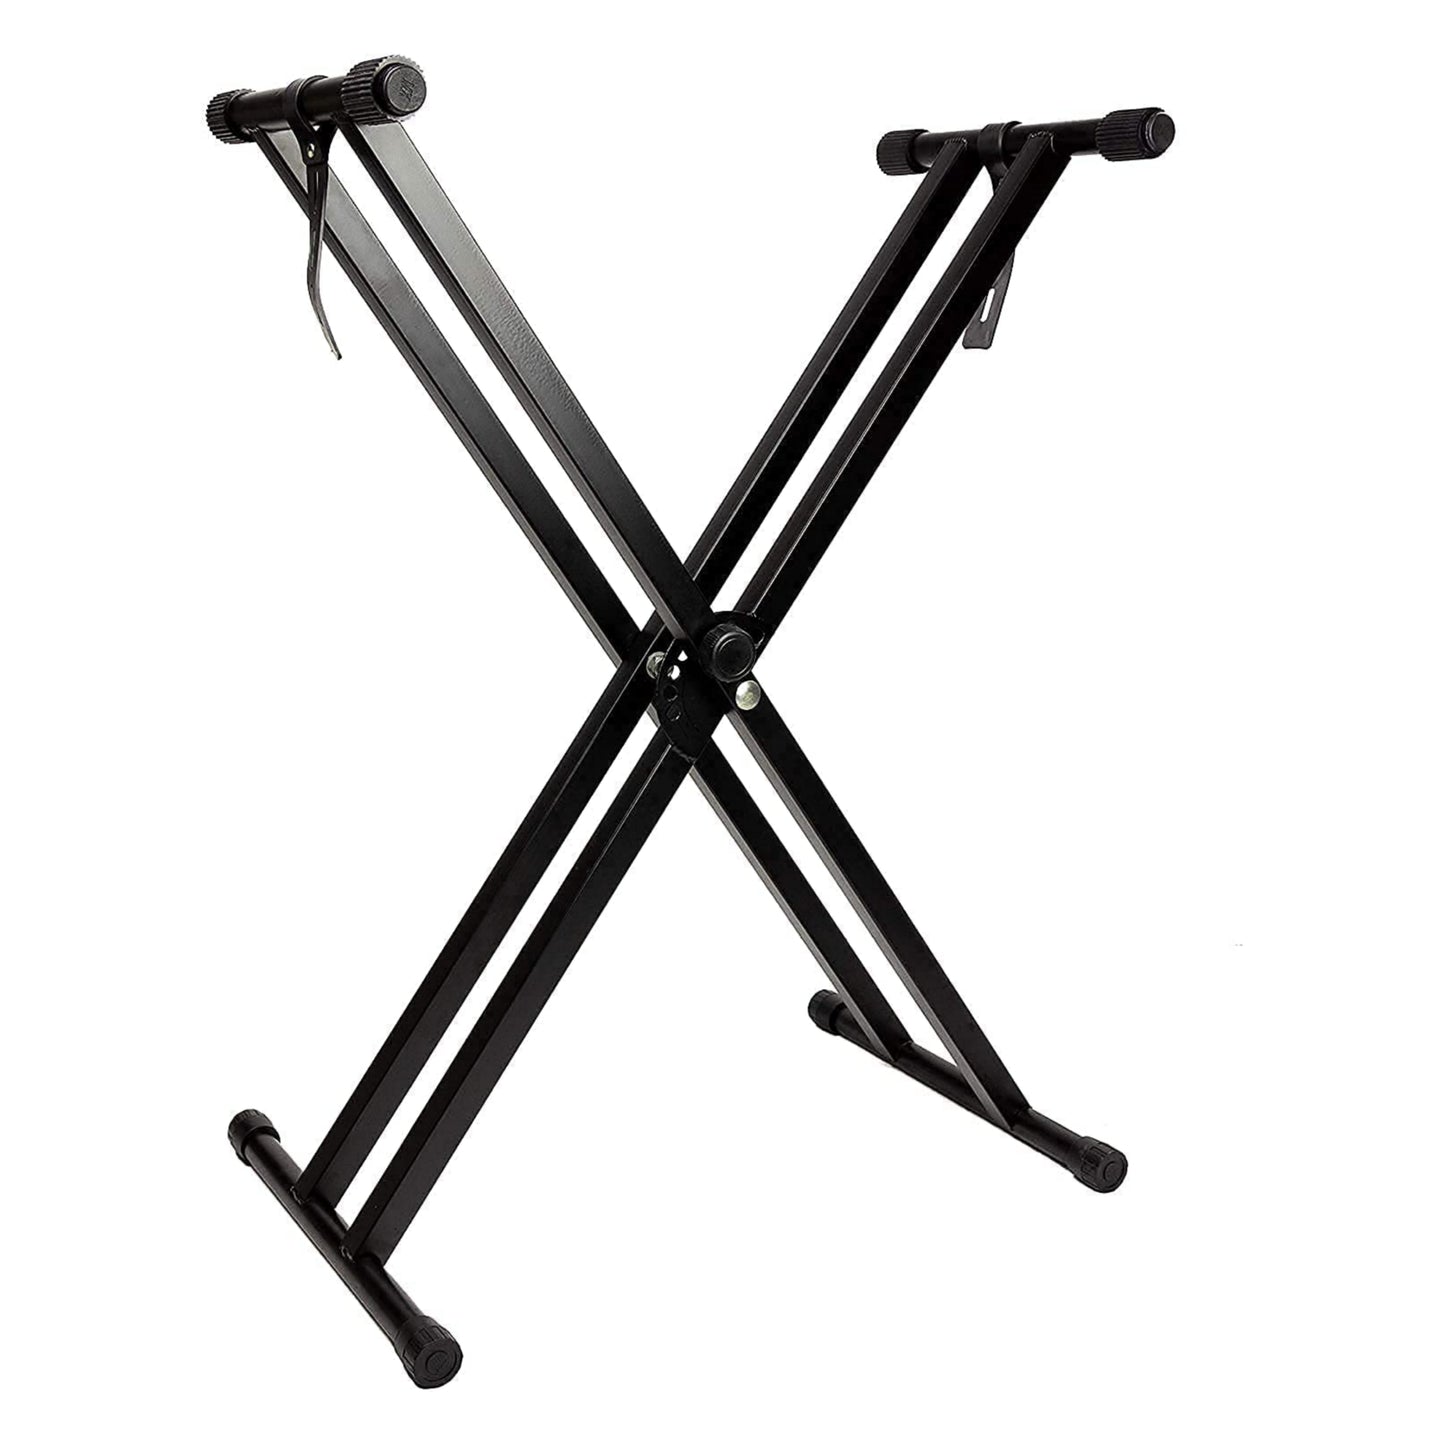 Double X-Shaped Musical Keyboard (Piano) Adjustable Stand - Brand New